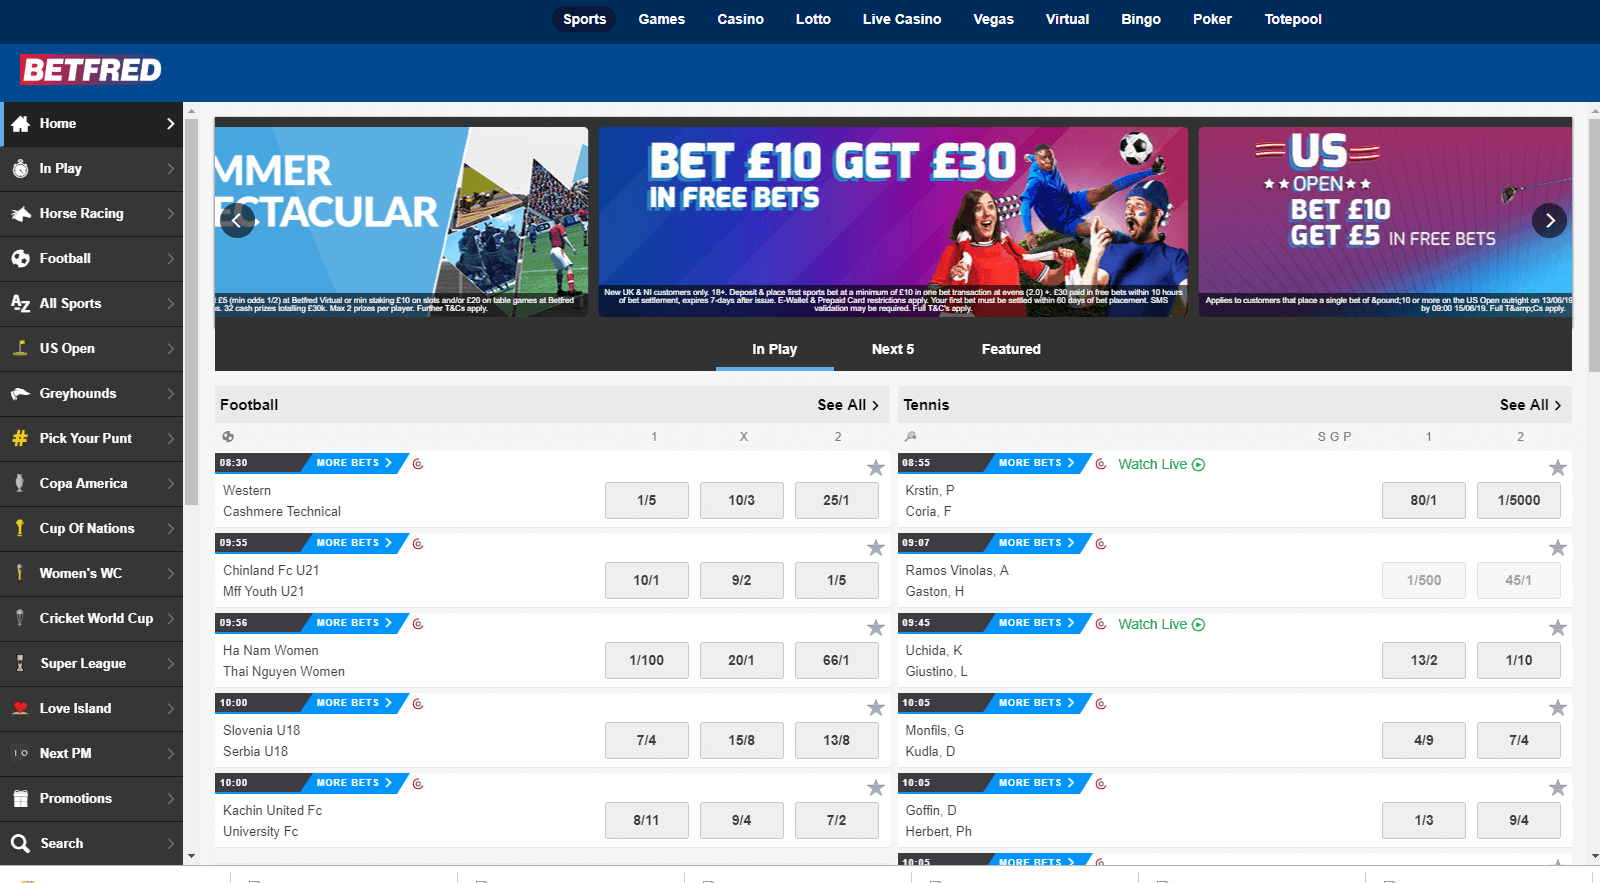 Betfred Betting Offers & Promotions